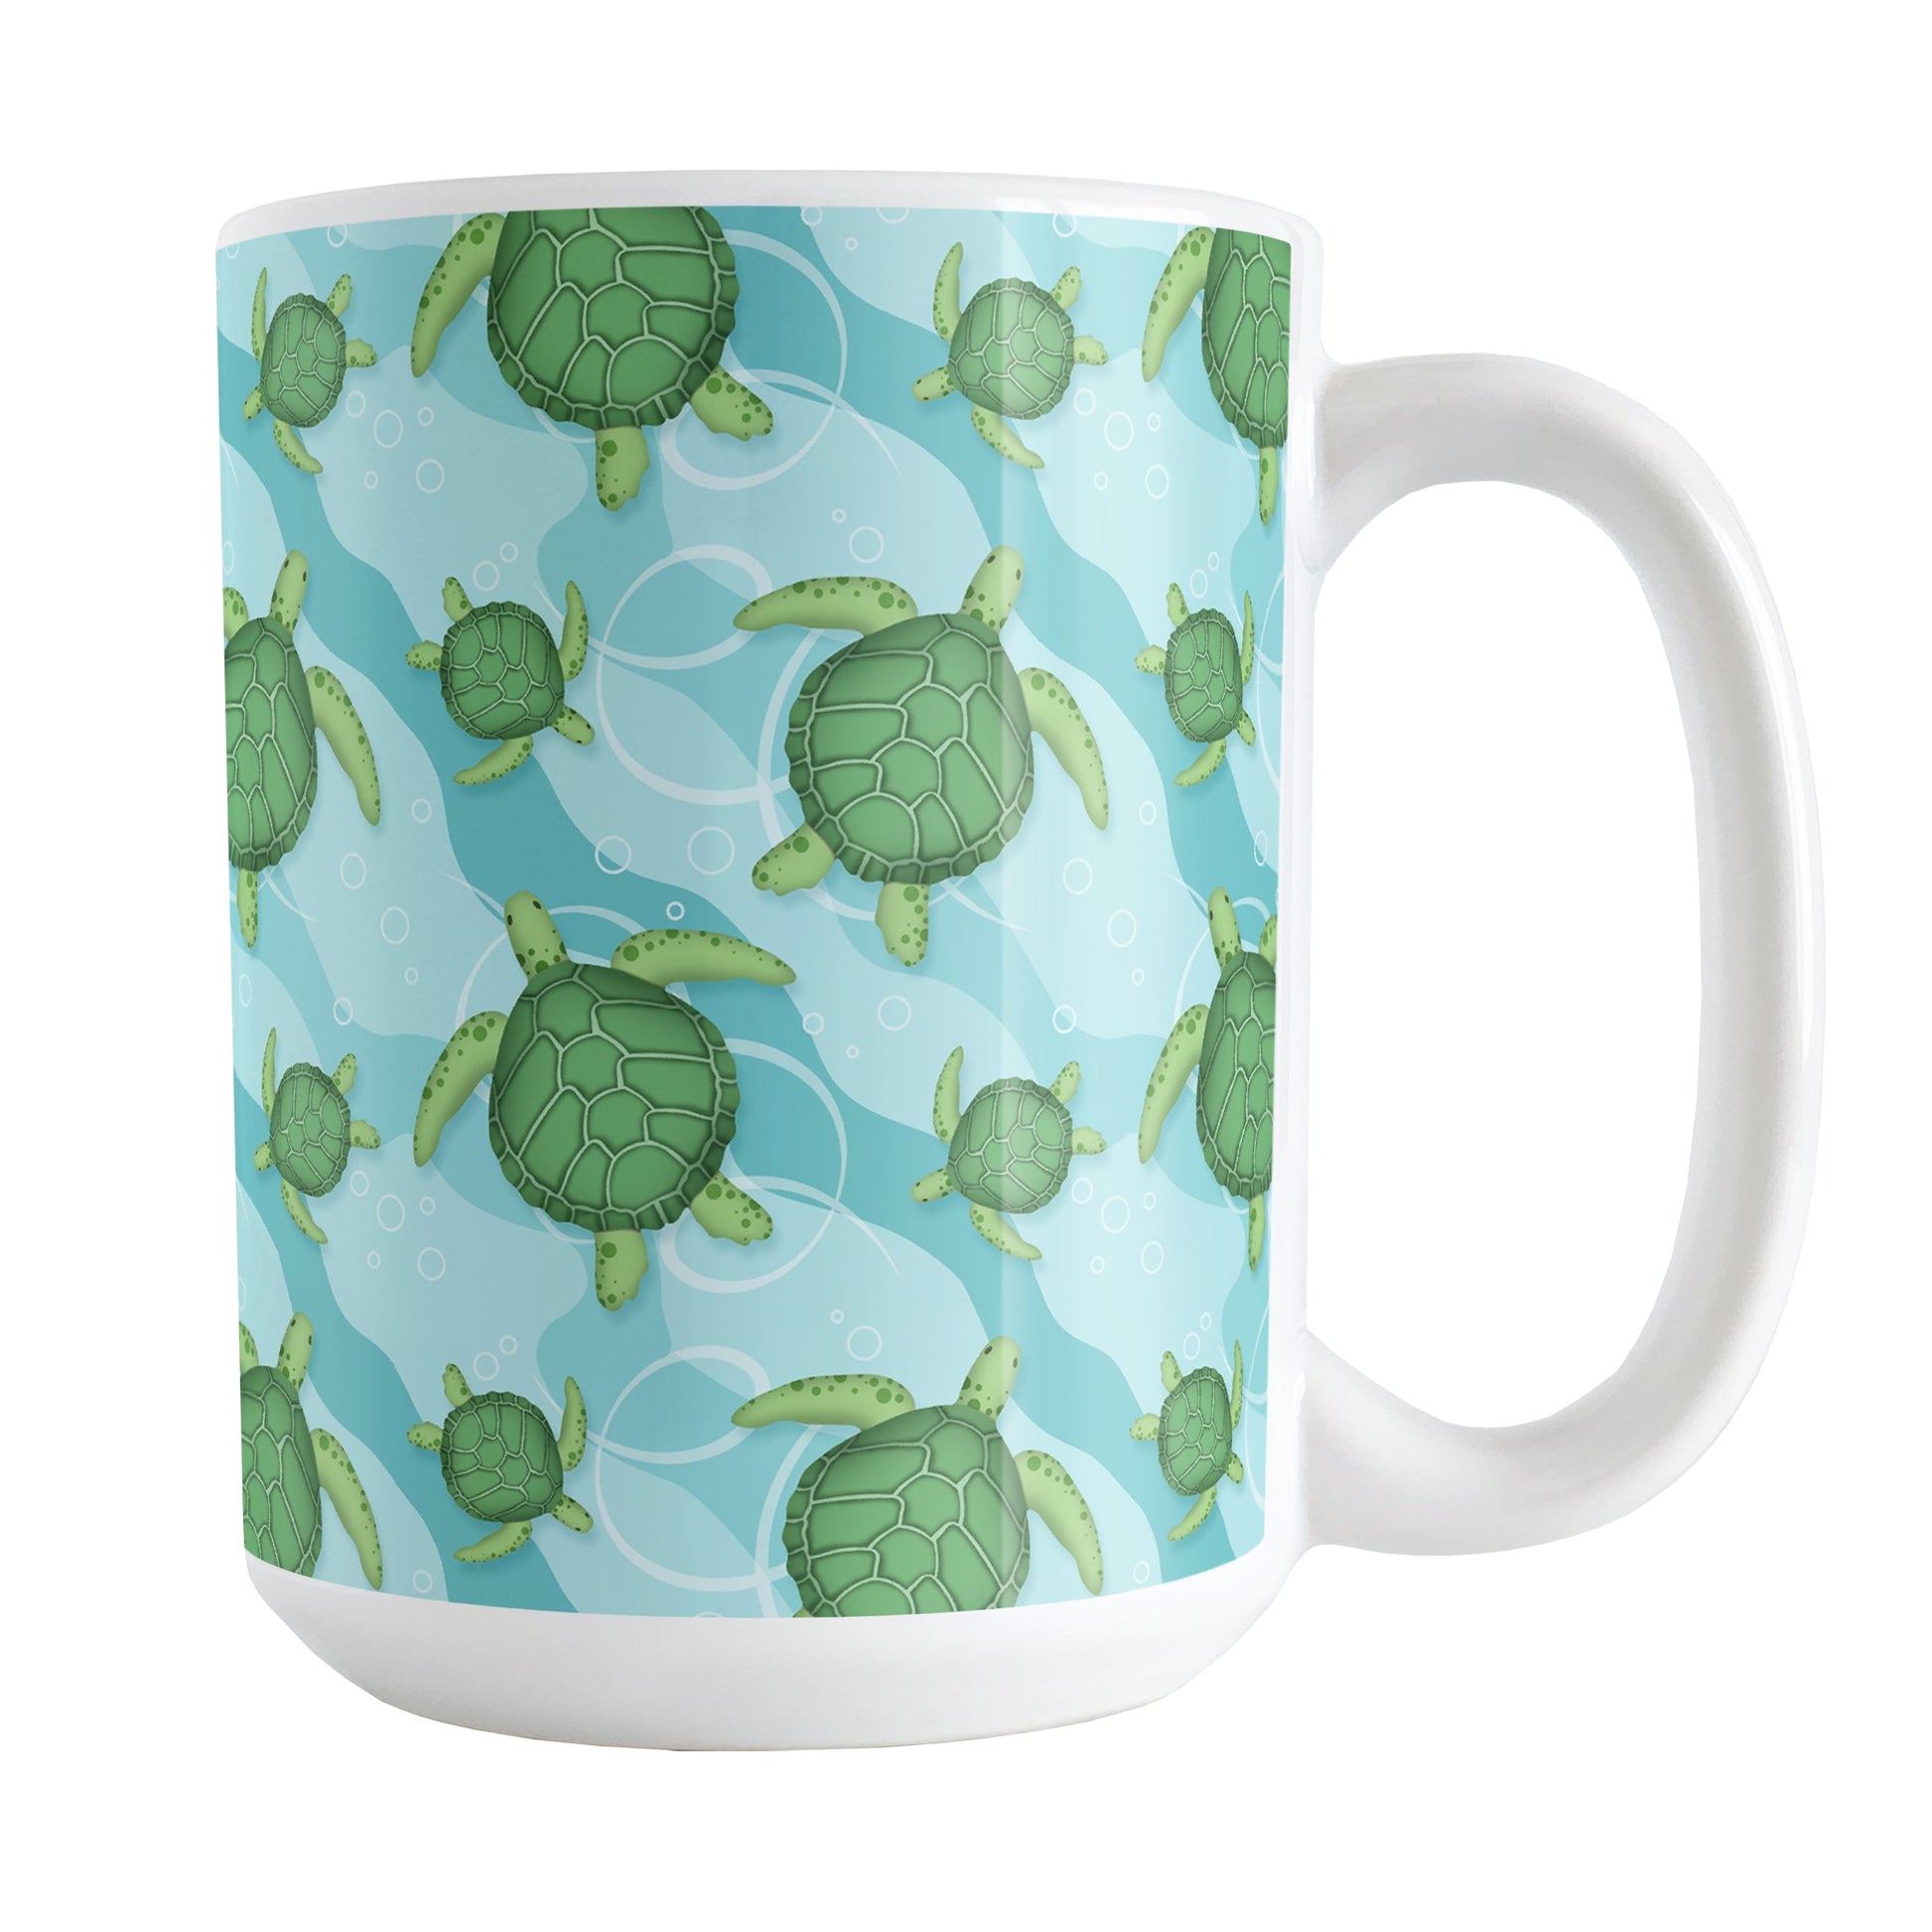 Aquatic Sea Turtle Pattern Mug (15oz) at Amy's Coffee Mugs. A ceramic coffee mug with an aquatic pattern of green sea turtles, swimming over a wavy underwater pattern design in blue and turquoise, that wraps around the mug to the handle.